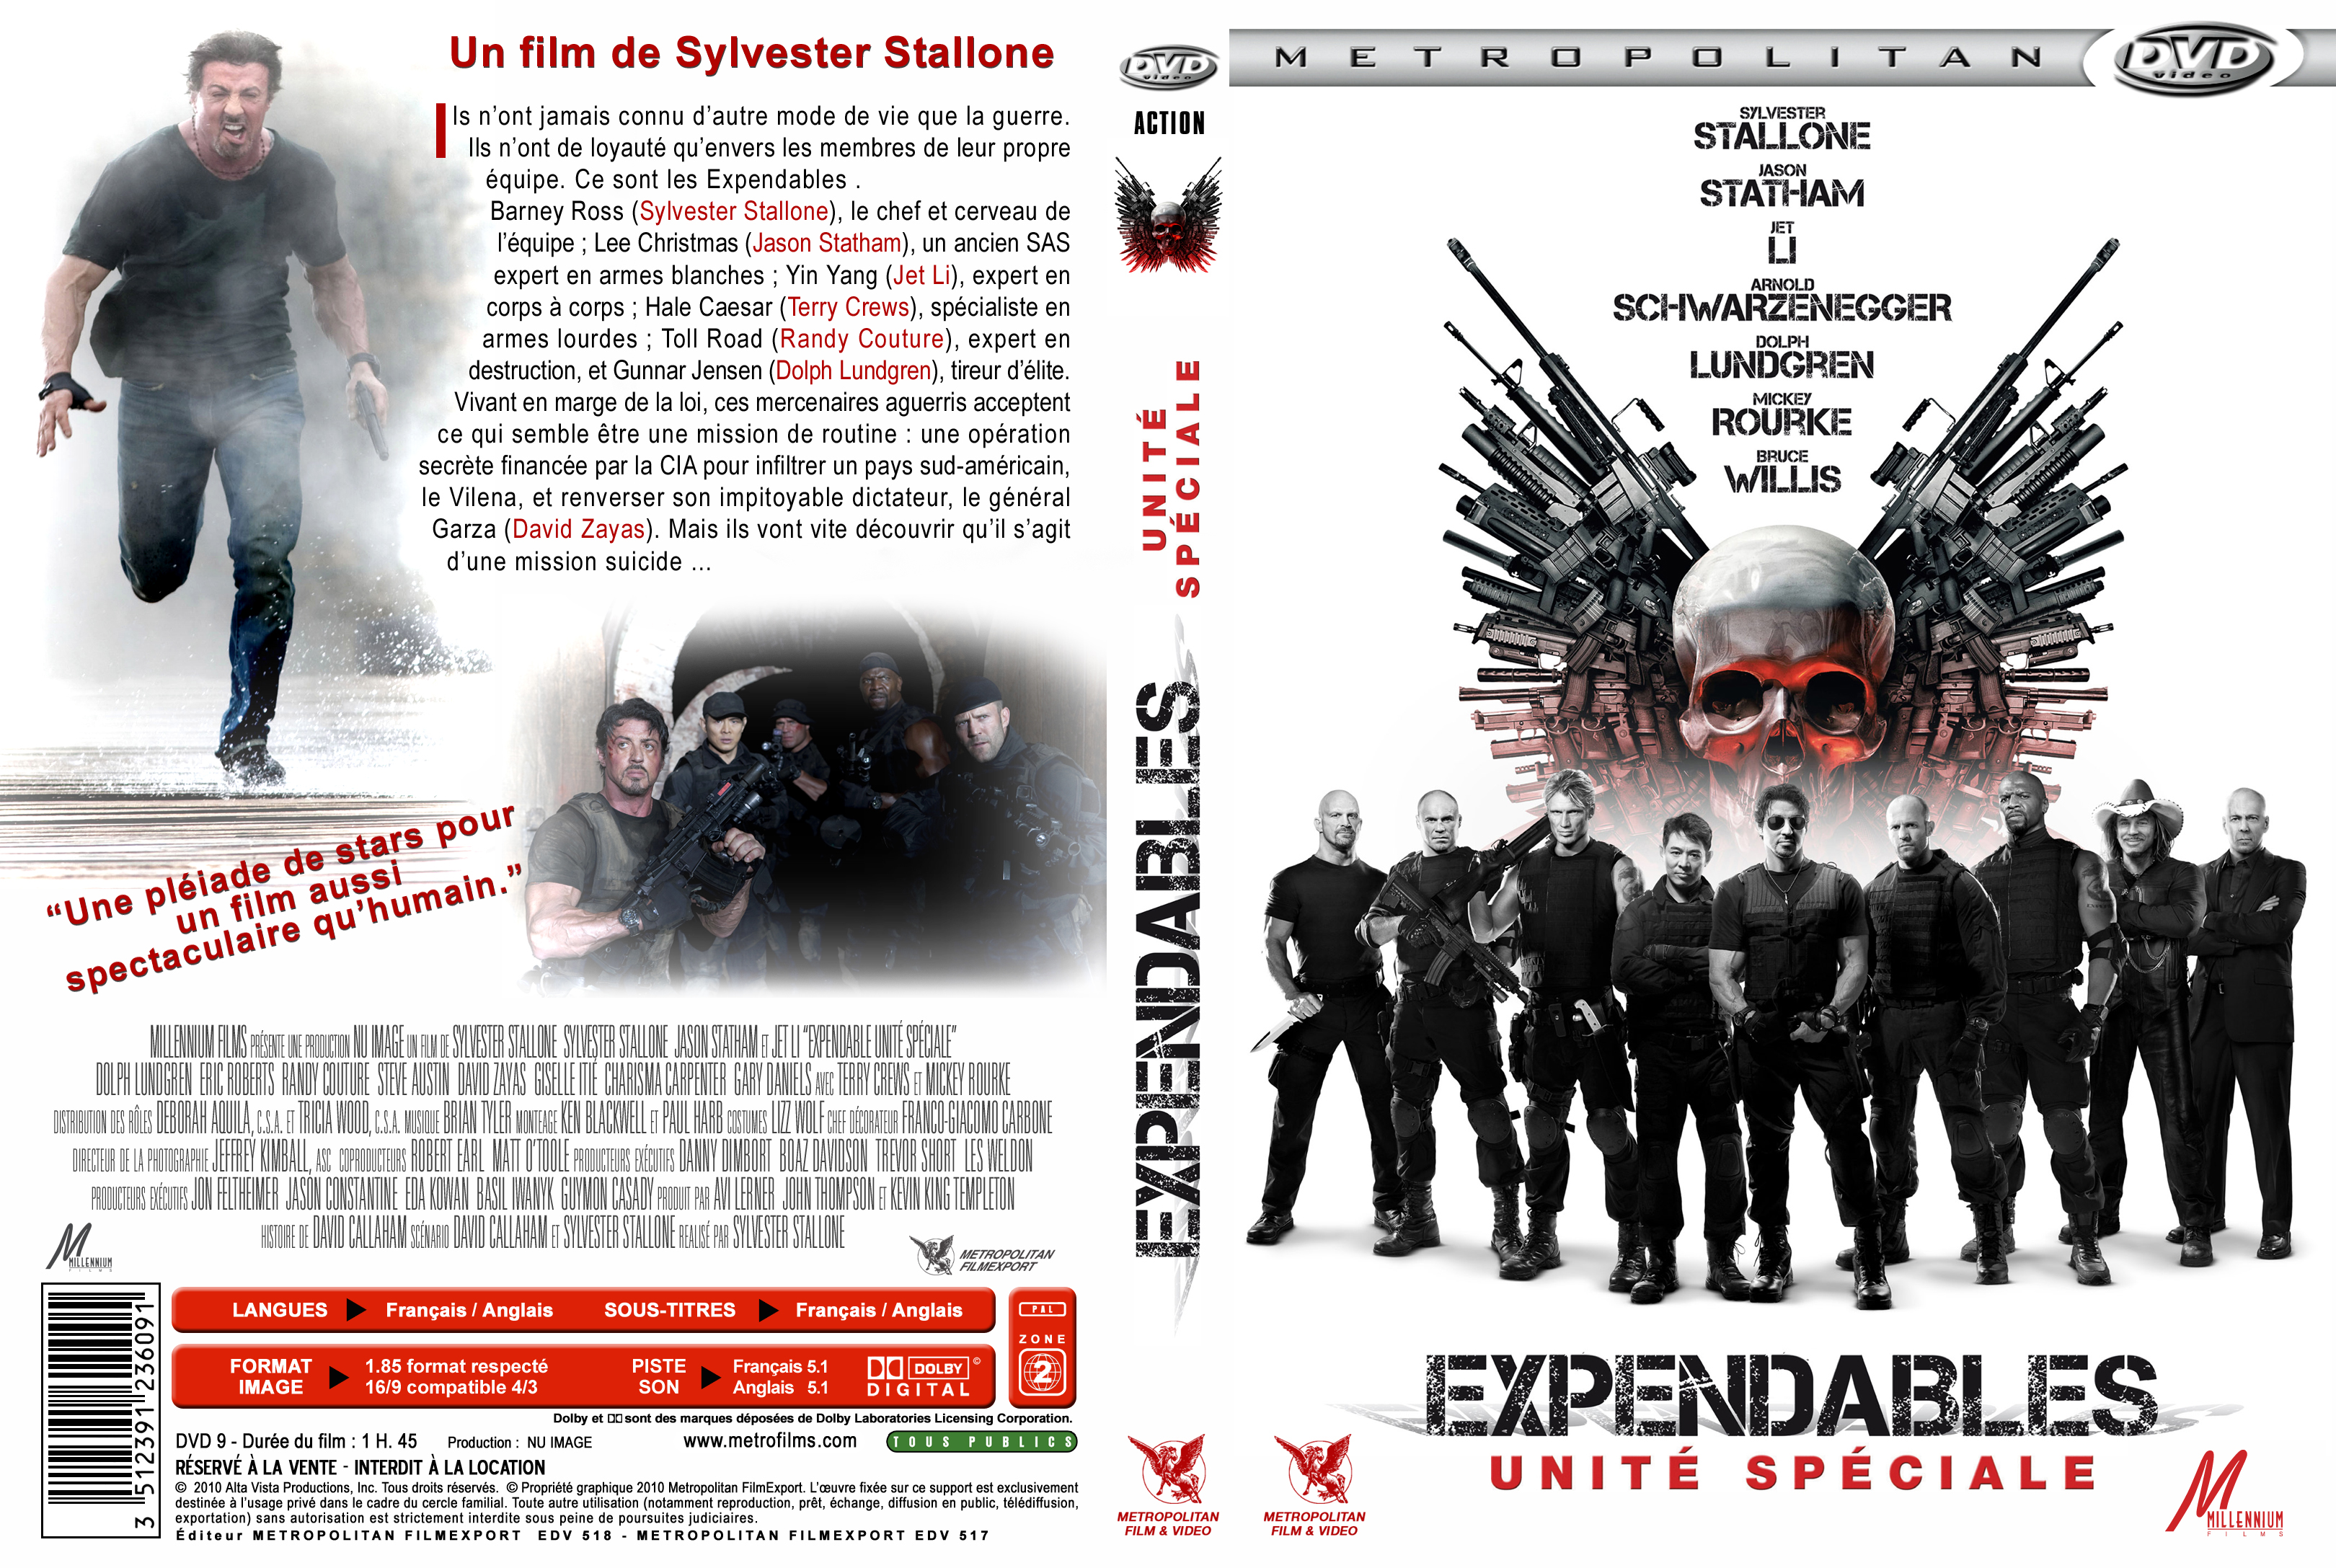 Jaquette DVD Expendables custom